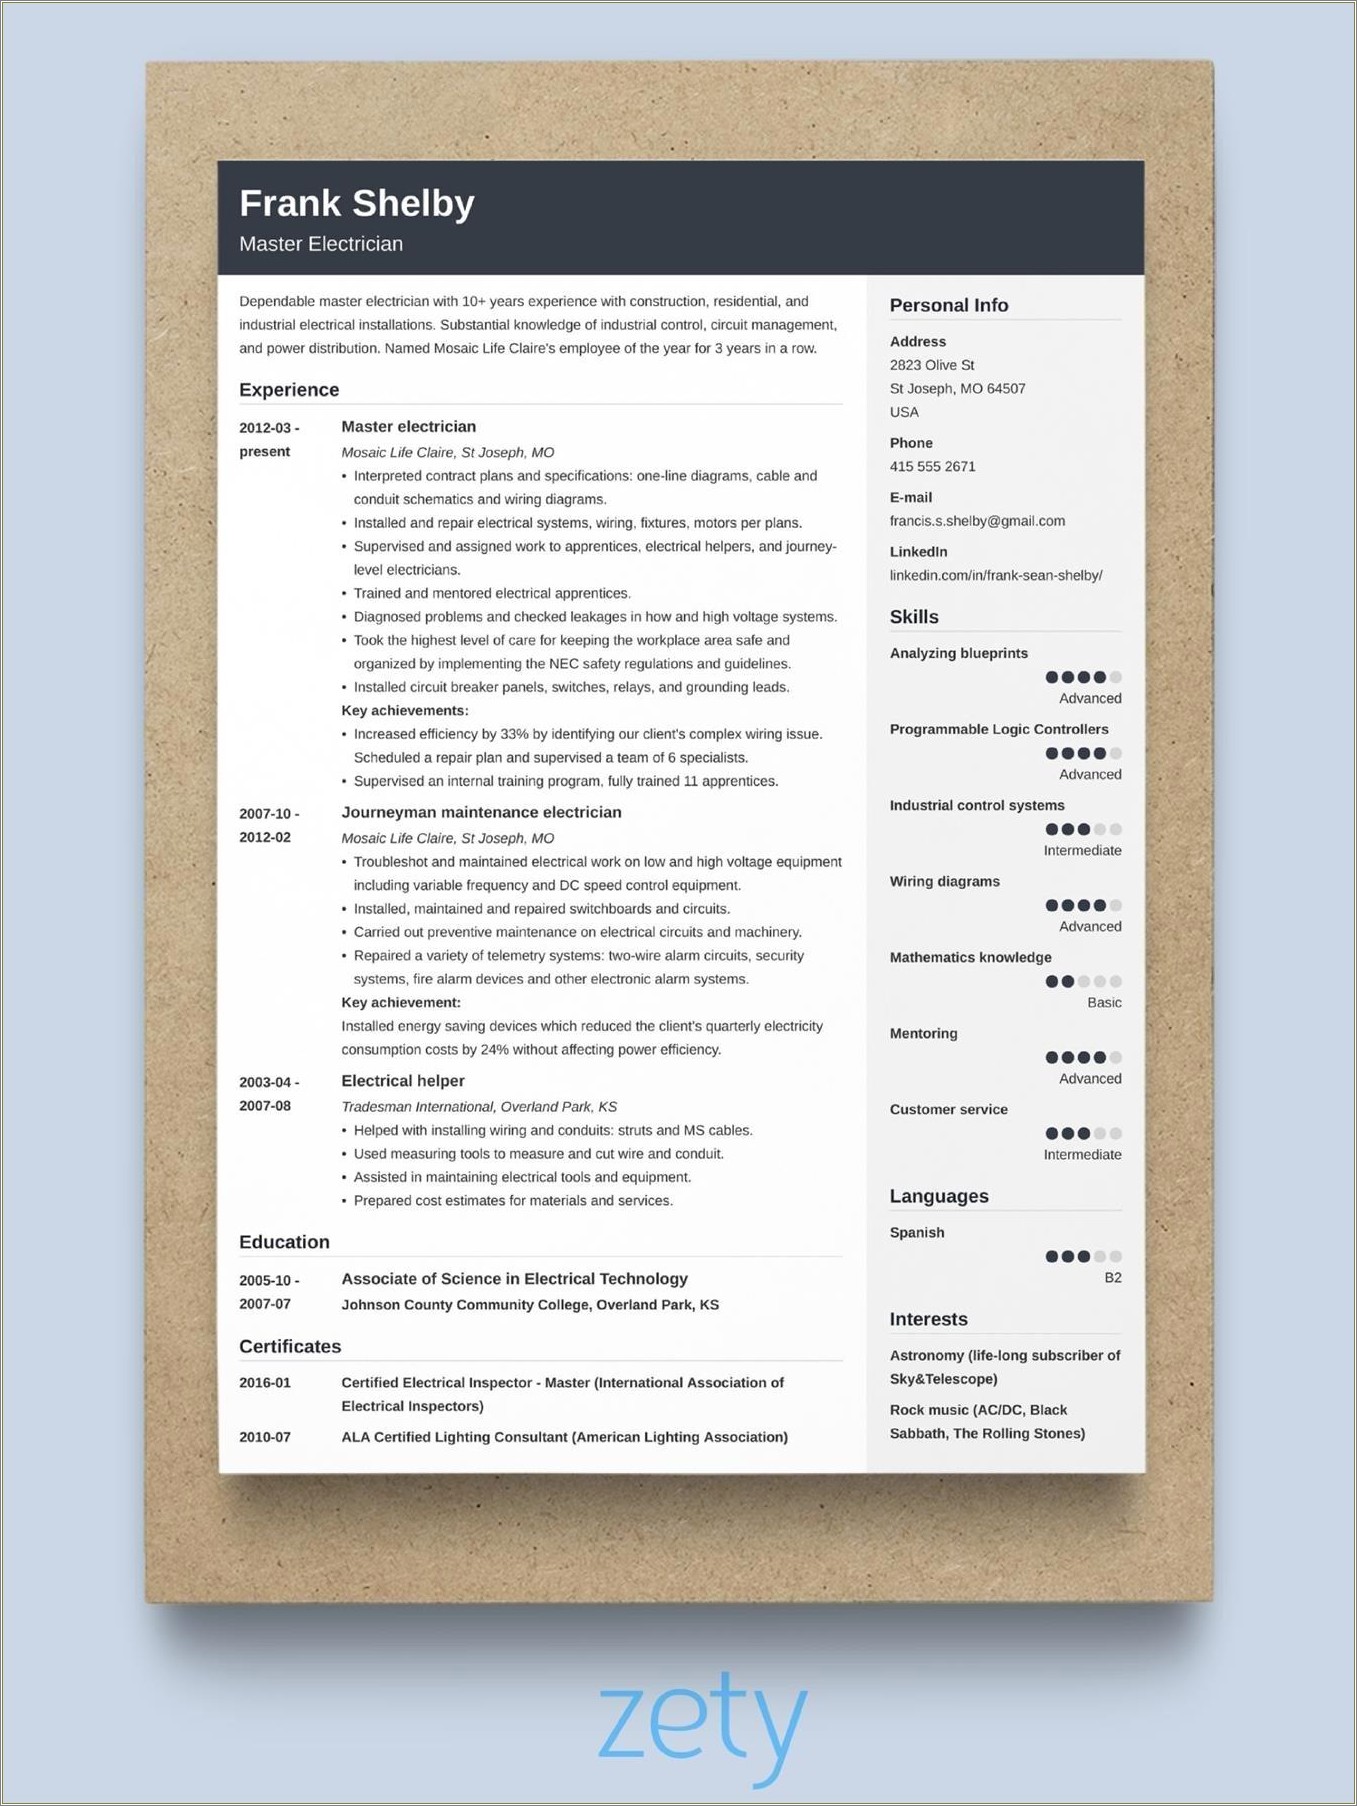 Resume Format For Long Work History